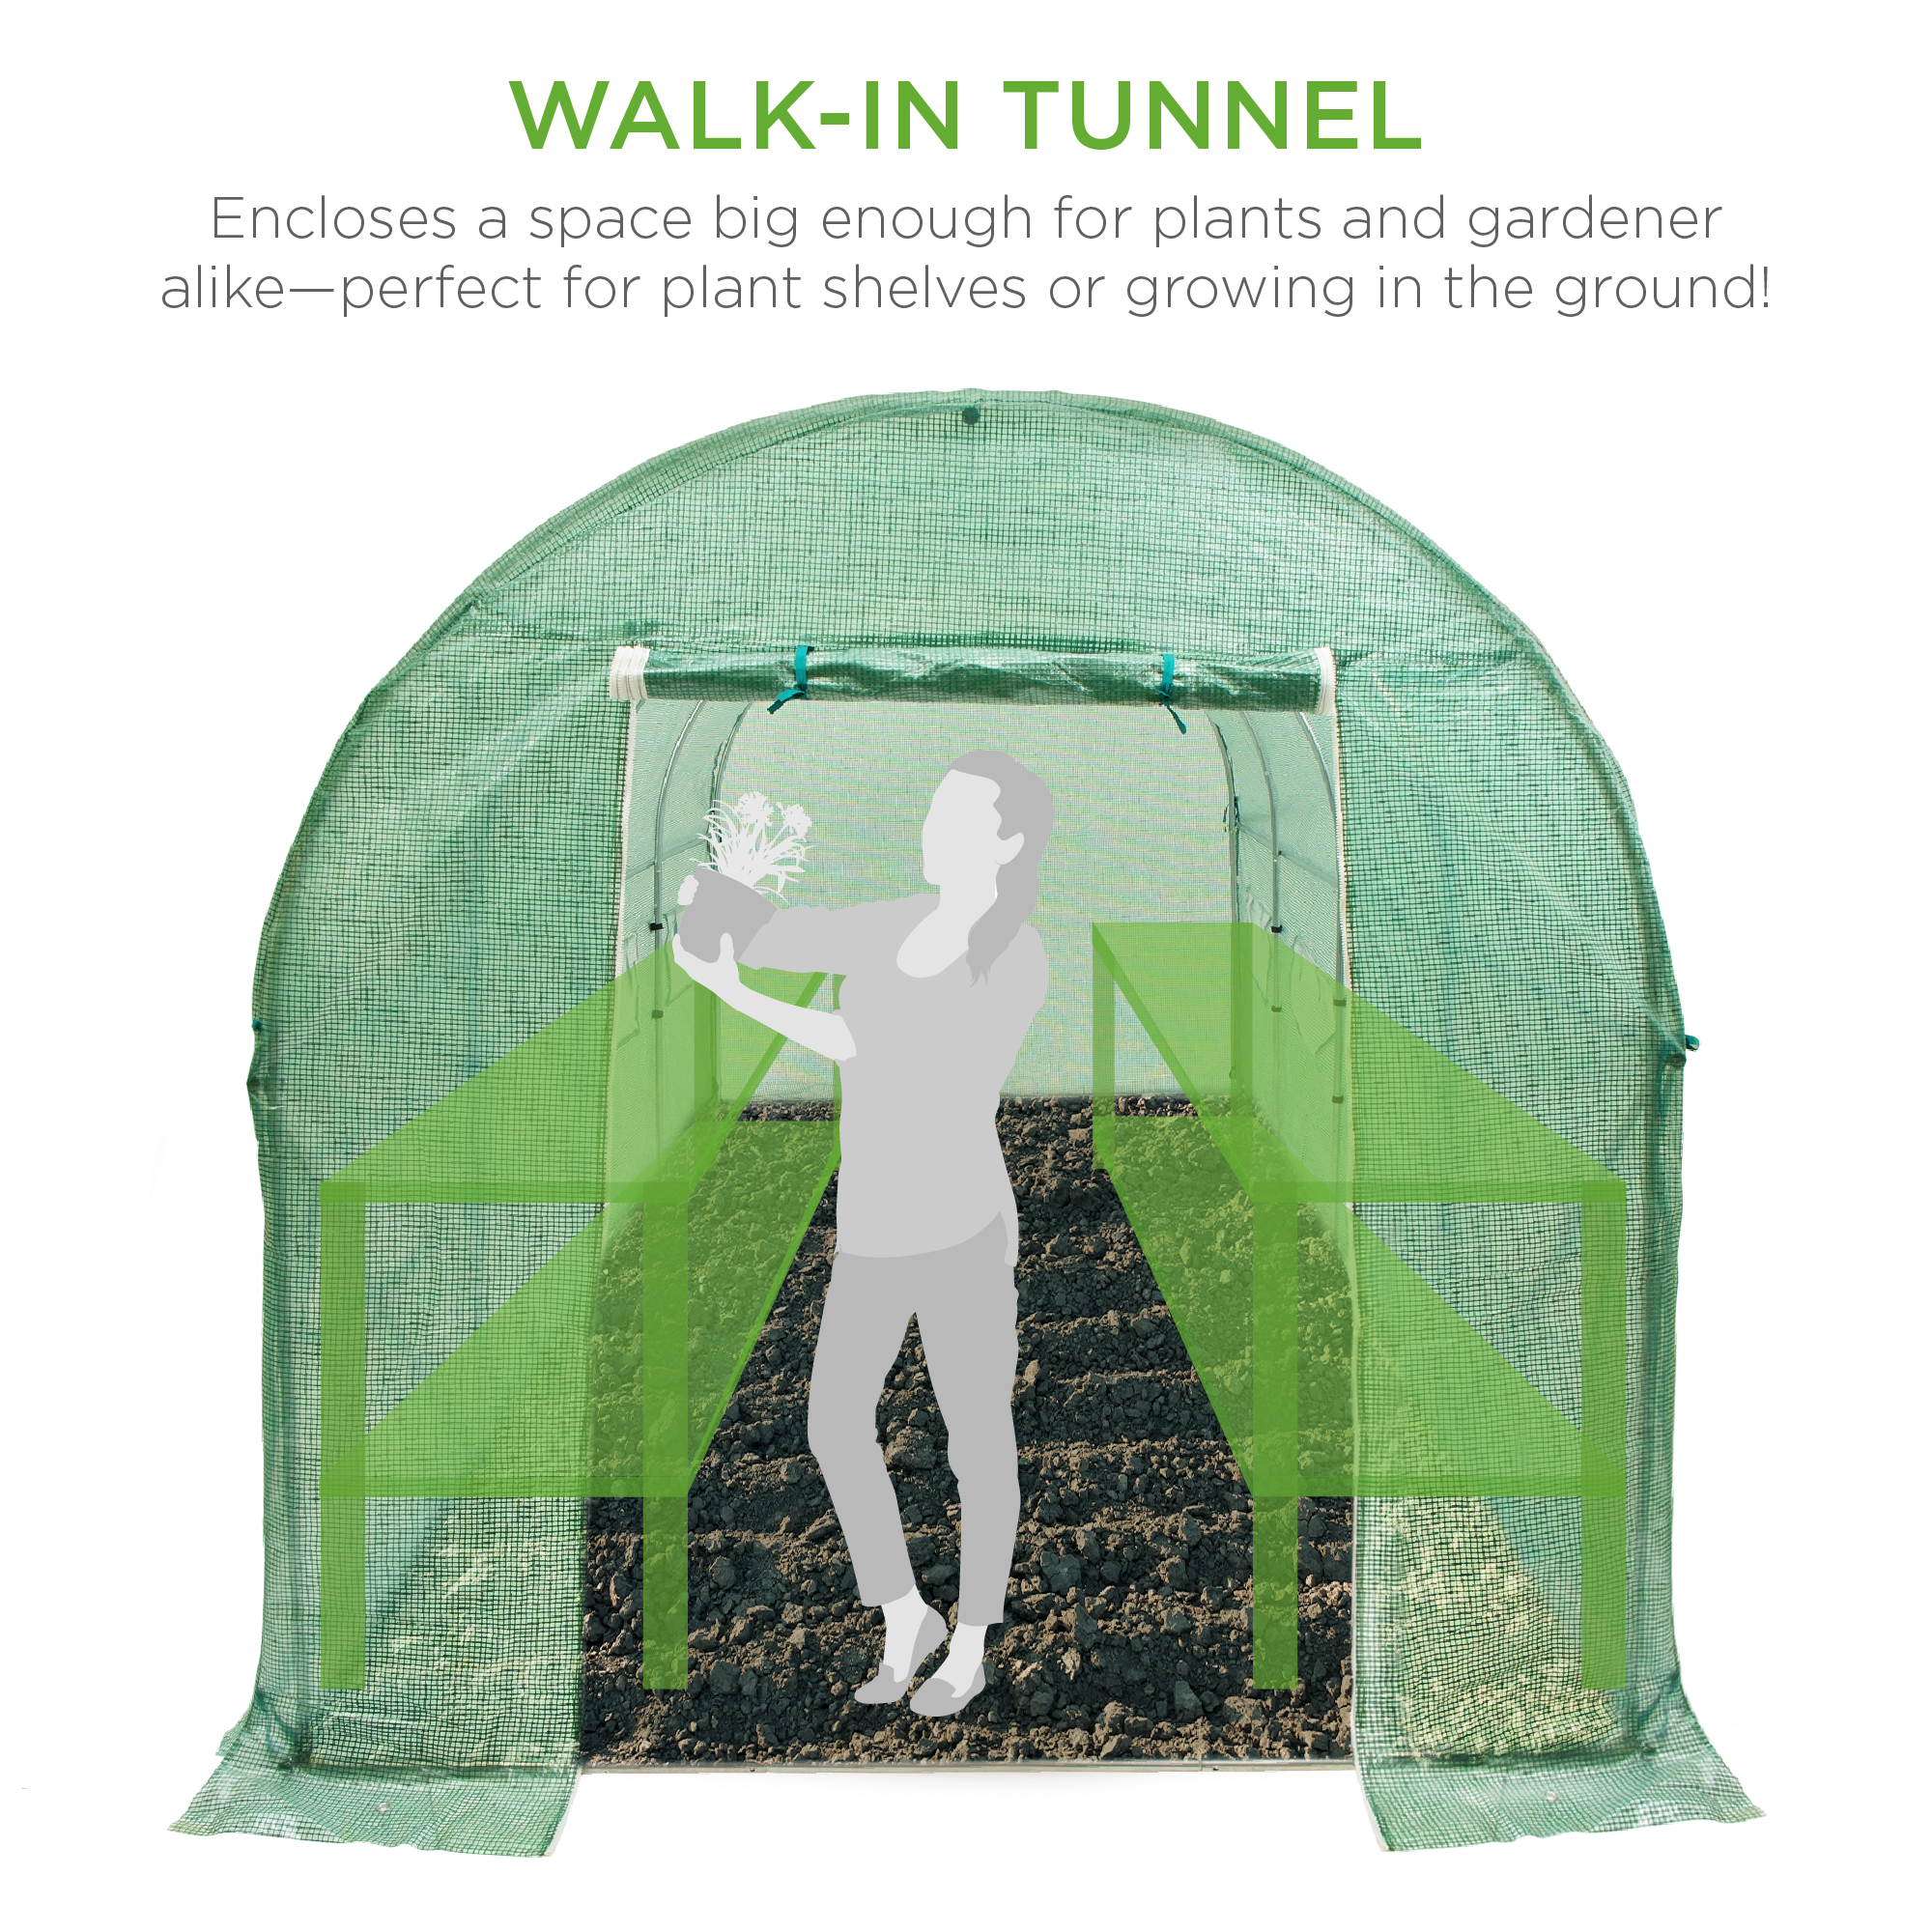 Best Choice Products 15x7x7ft Walk-In Greenhouse Tunnel, Garden Accessory Tent w/ 8 Roll-Up Windows, Zippered Door - image 3 of 6